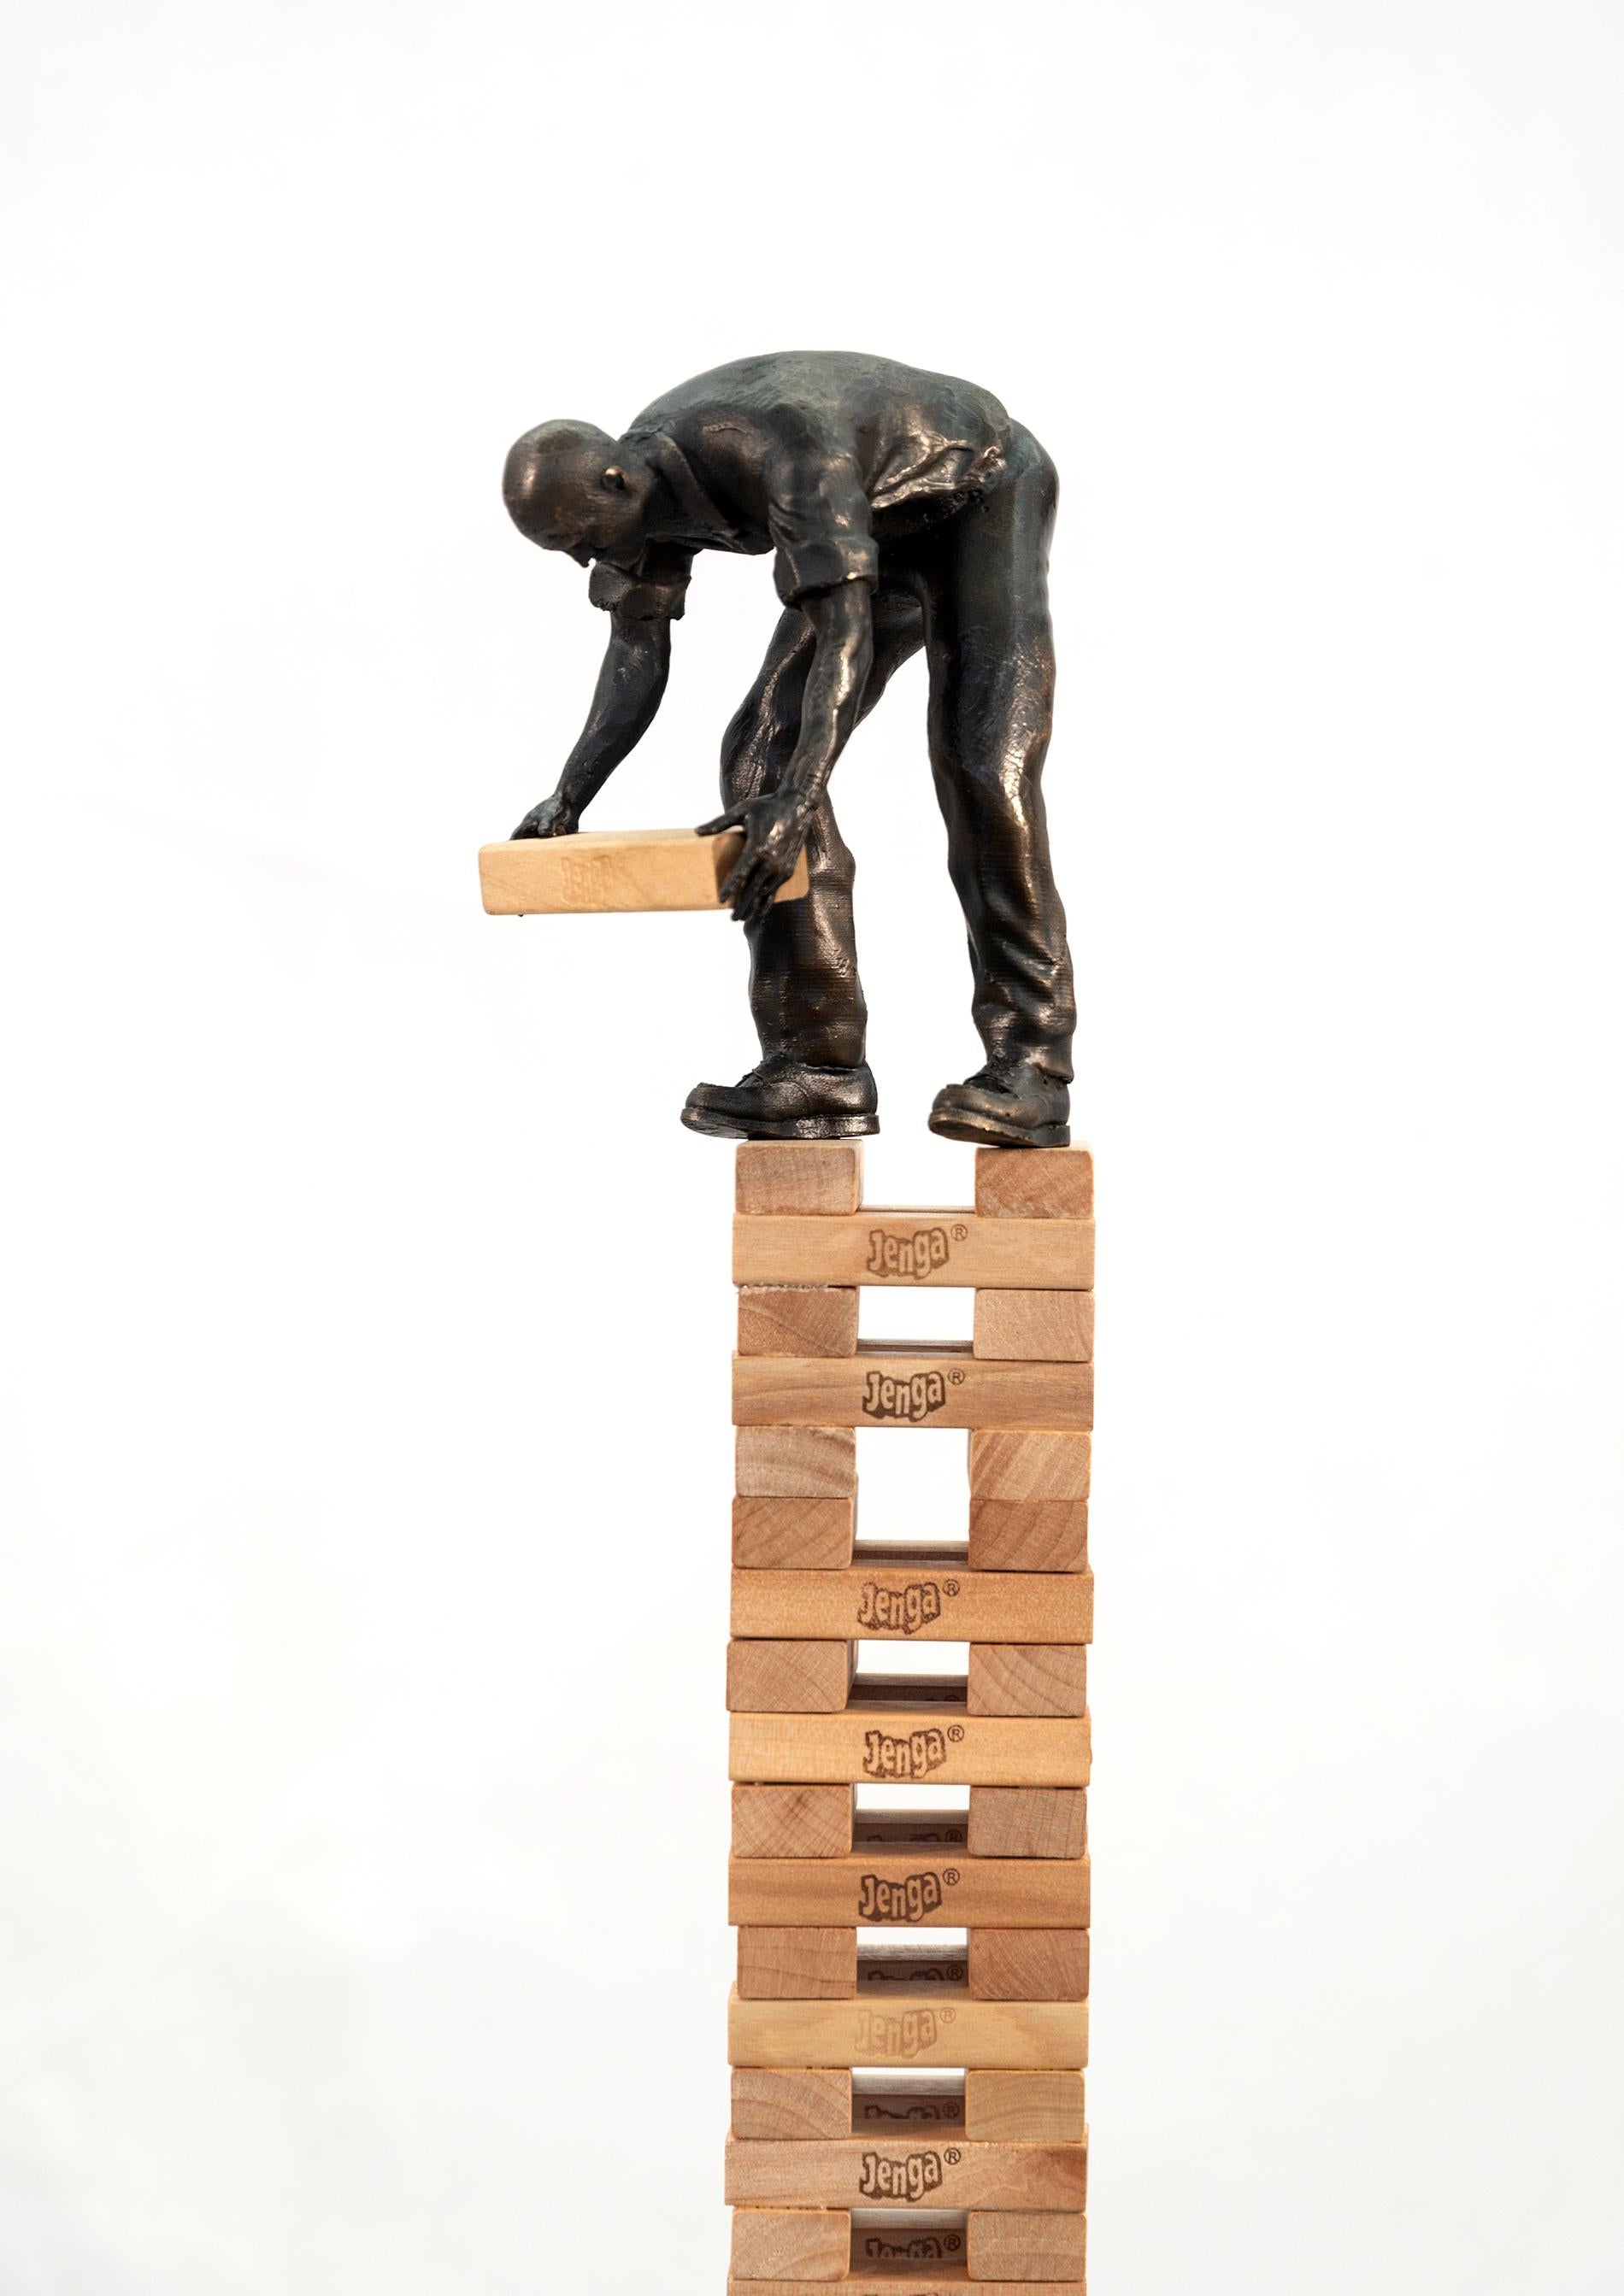 Work/Play Balance - tall, narrative, figurative, male, bronze, wood, sculpture - Contemporary Sculpture by Roch Smith